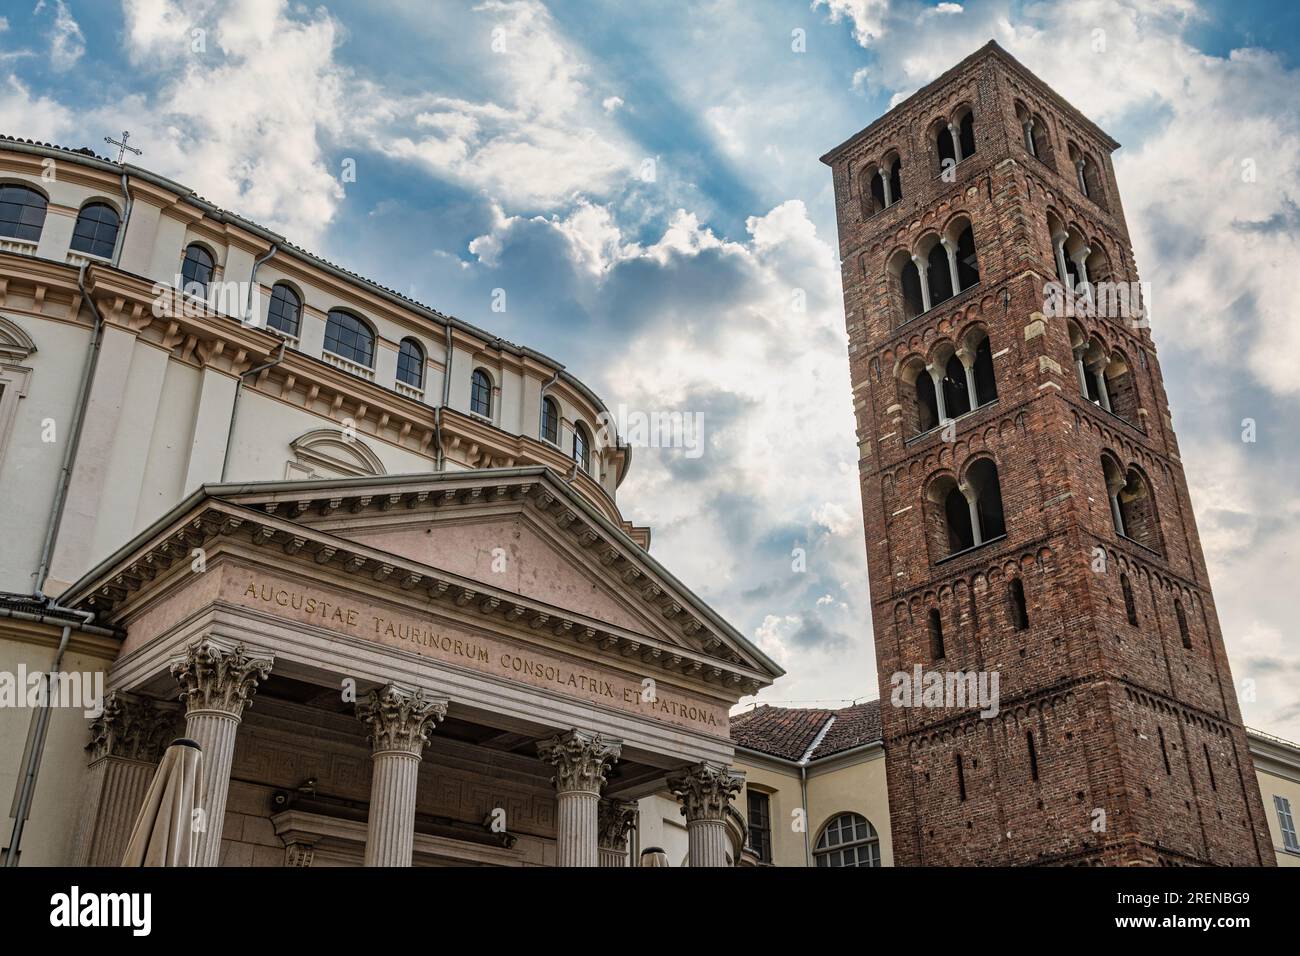 The bell tower and the facade of the sanctuary of the Consolata. One of the oldest places of worship in Turin. Turin, Turin province, Piedmon, Italy, Stock Photo